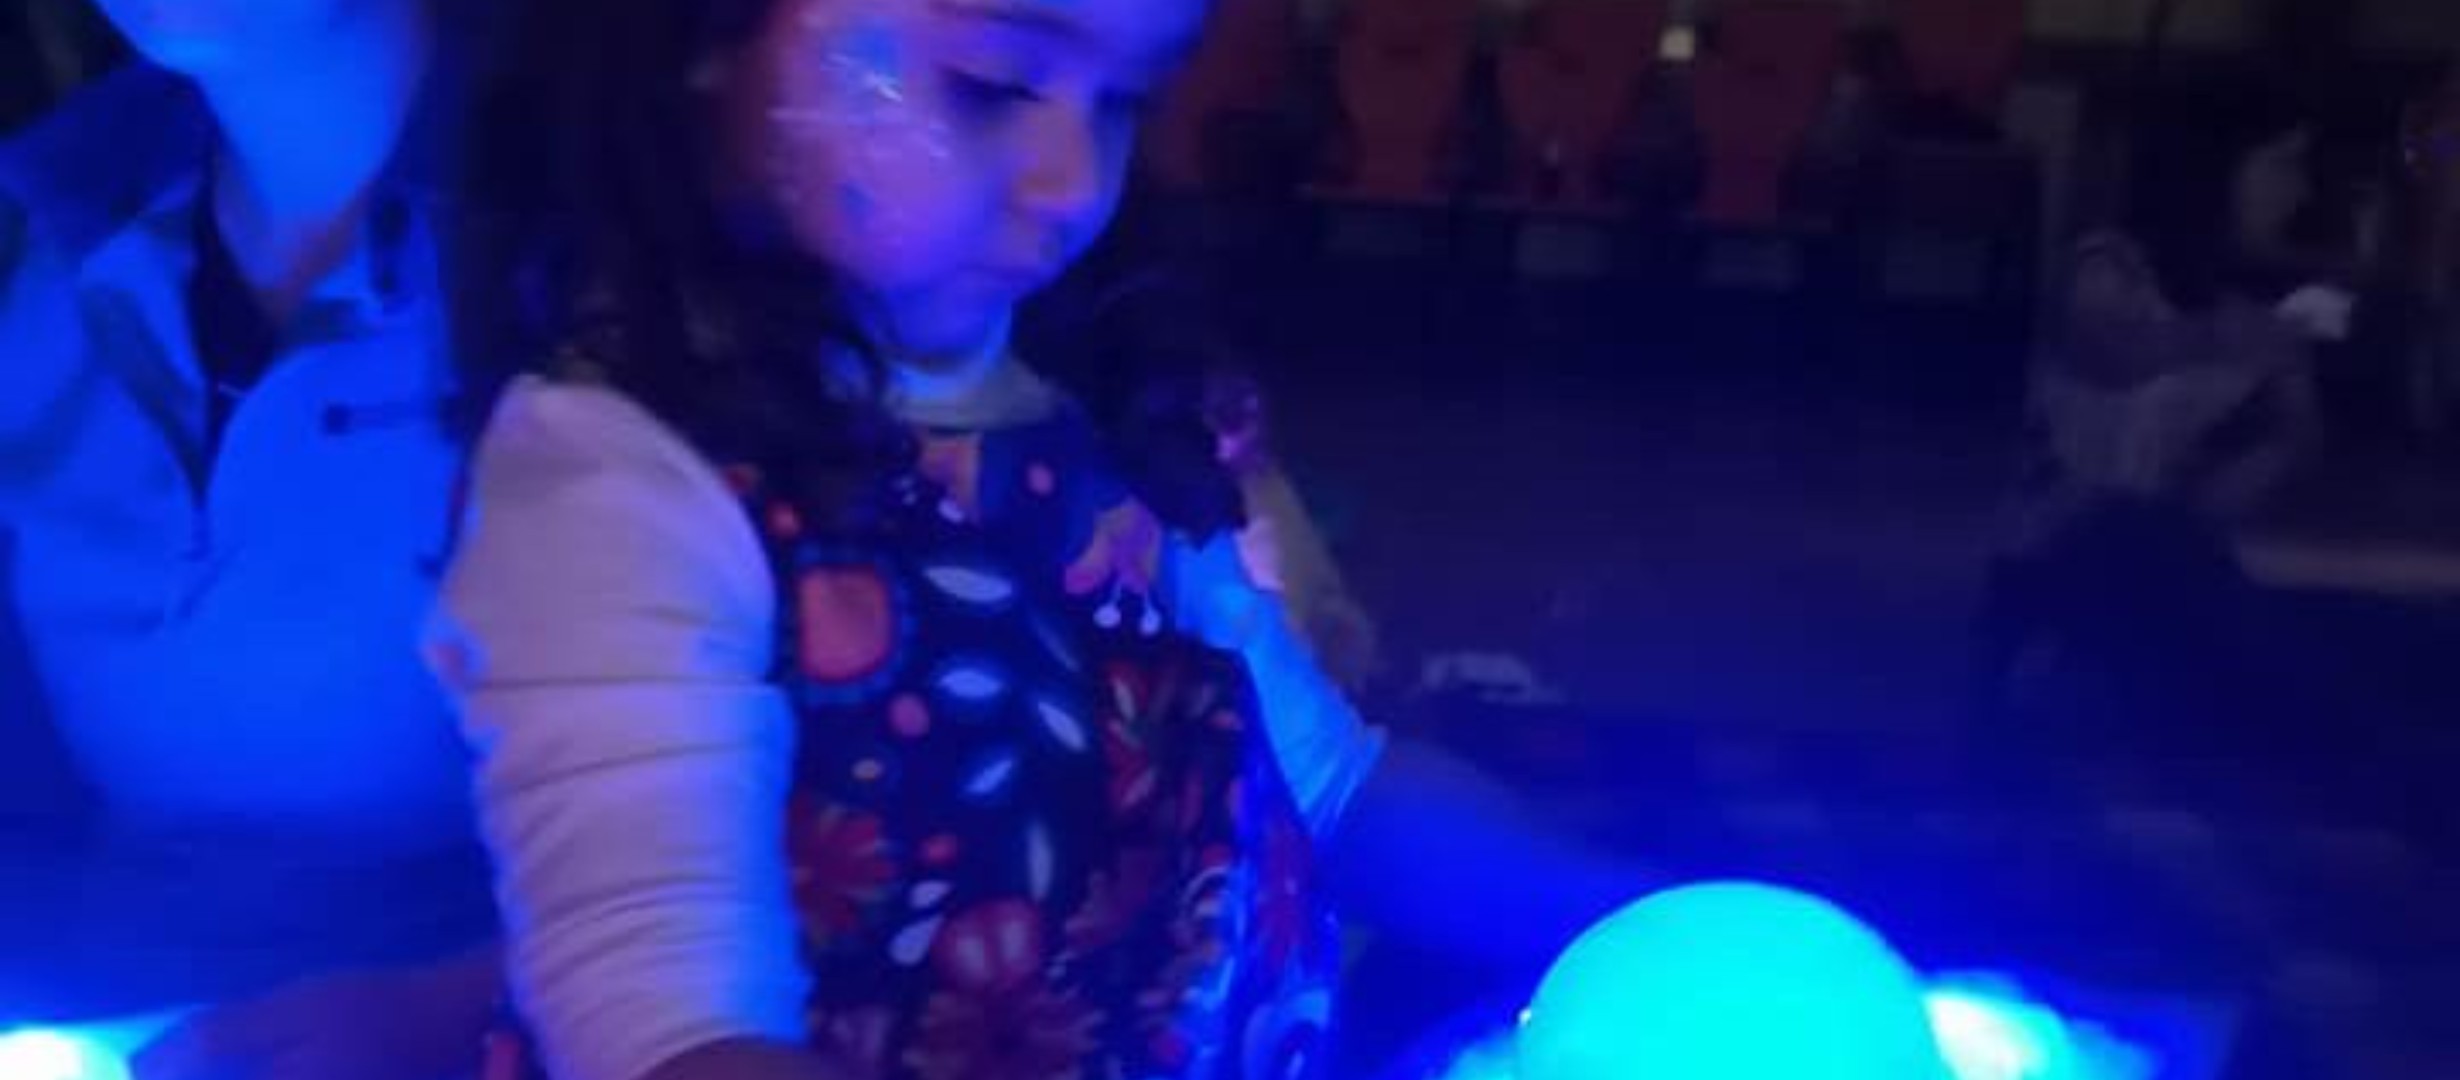 child holding a tray with glowing bubbles